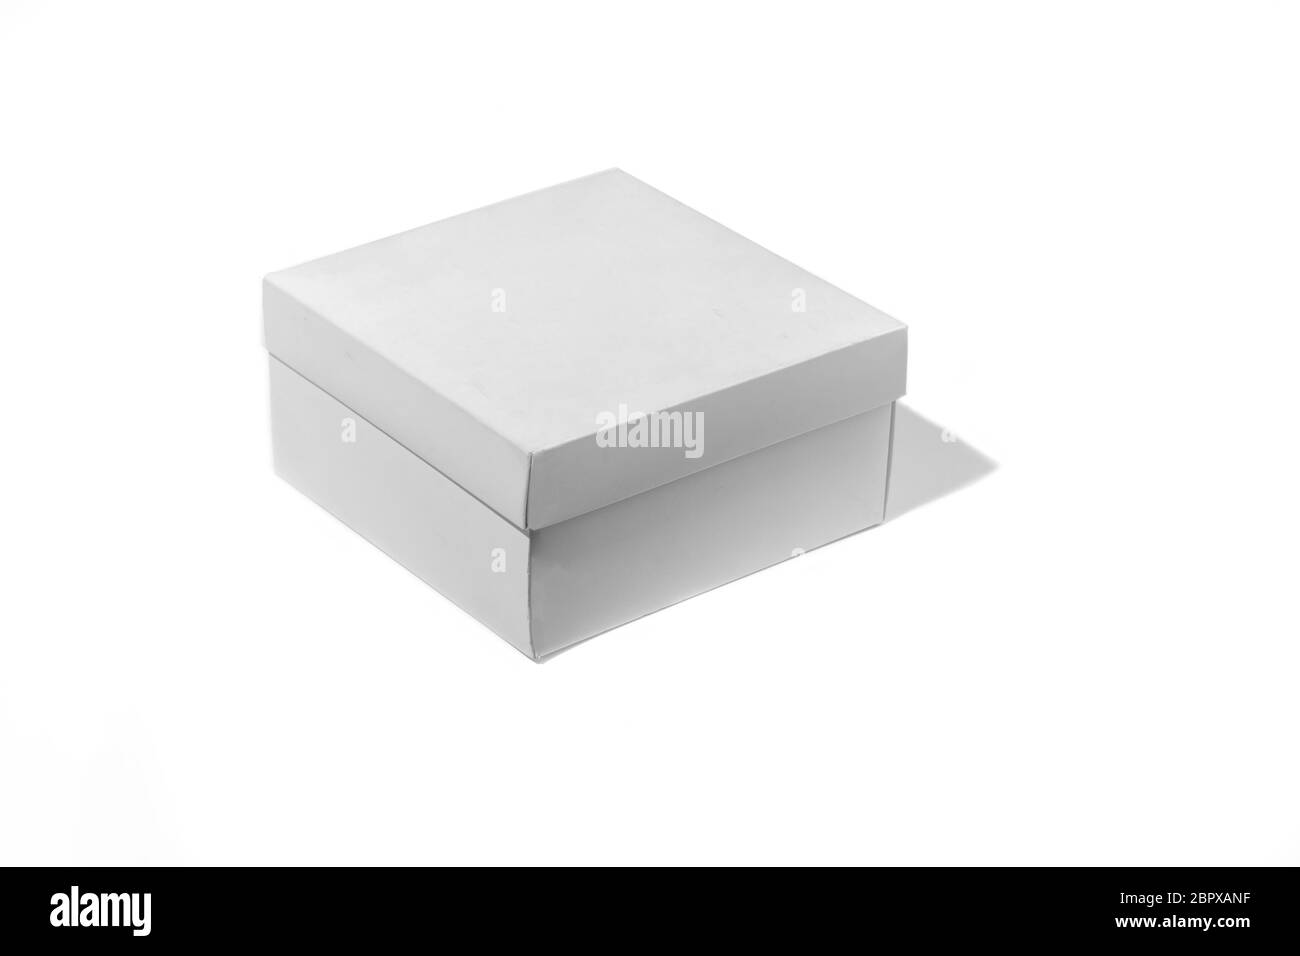 Blank white box isolated on a white studio background, copyspace for advertising. Ready for your graphics. Shopping, shipping, packing, delivery. Paperboard, cardboard for transportation and recycling. Stock Photo